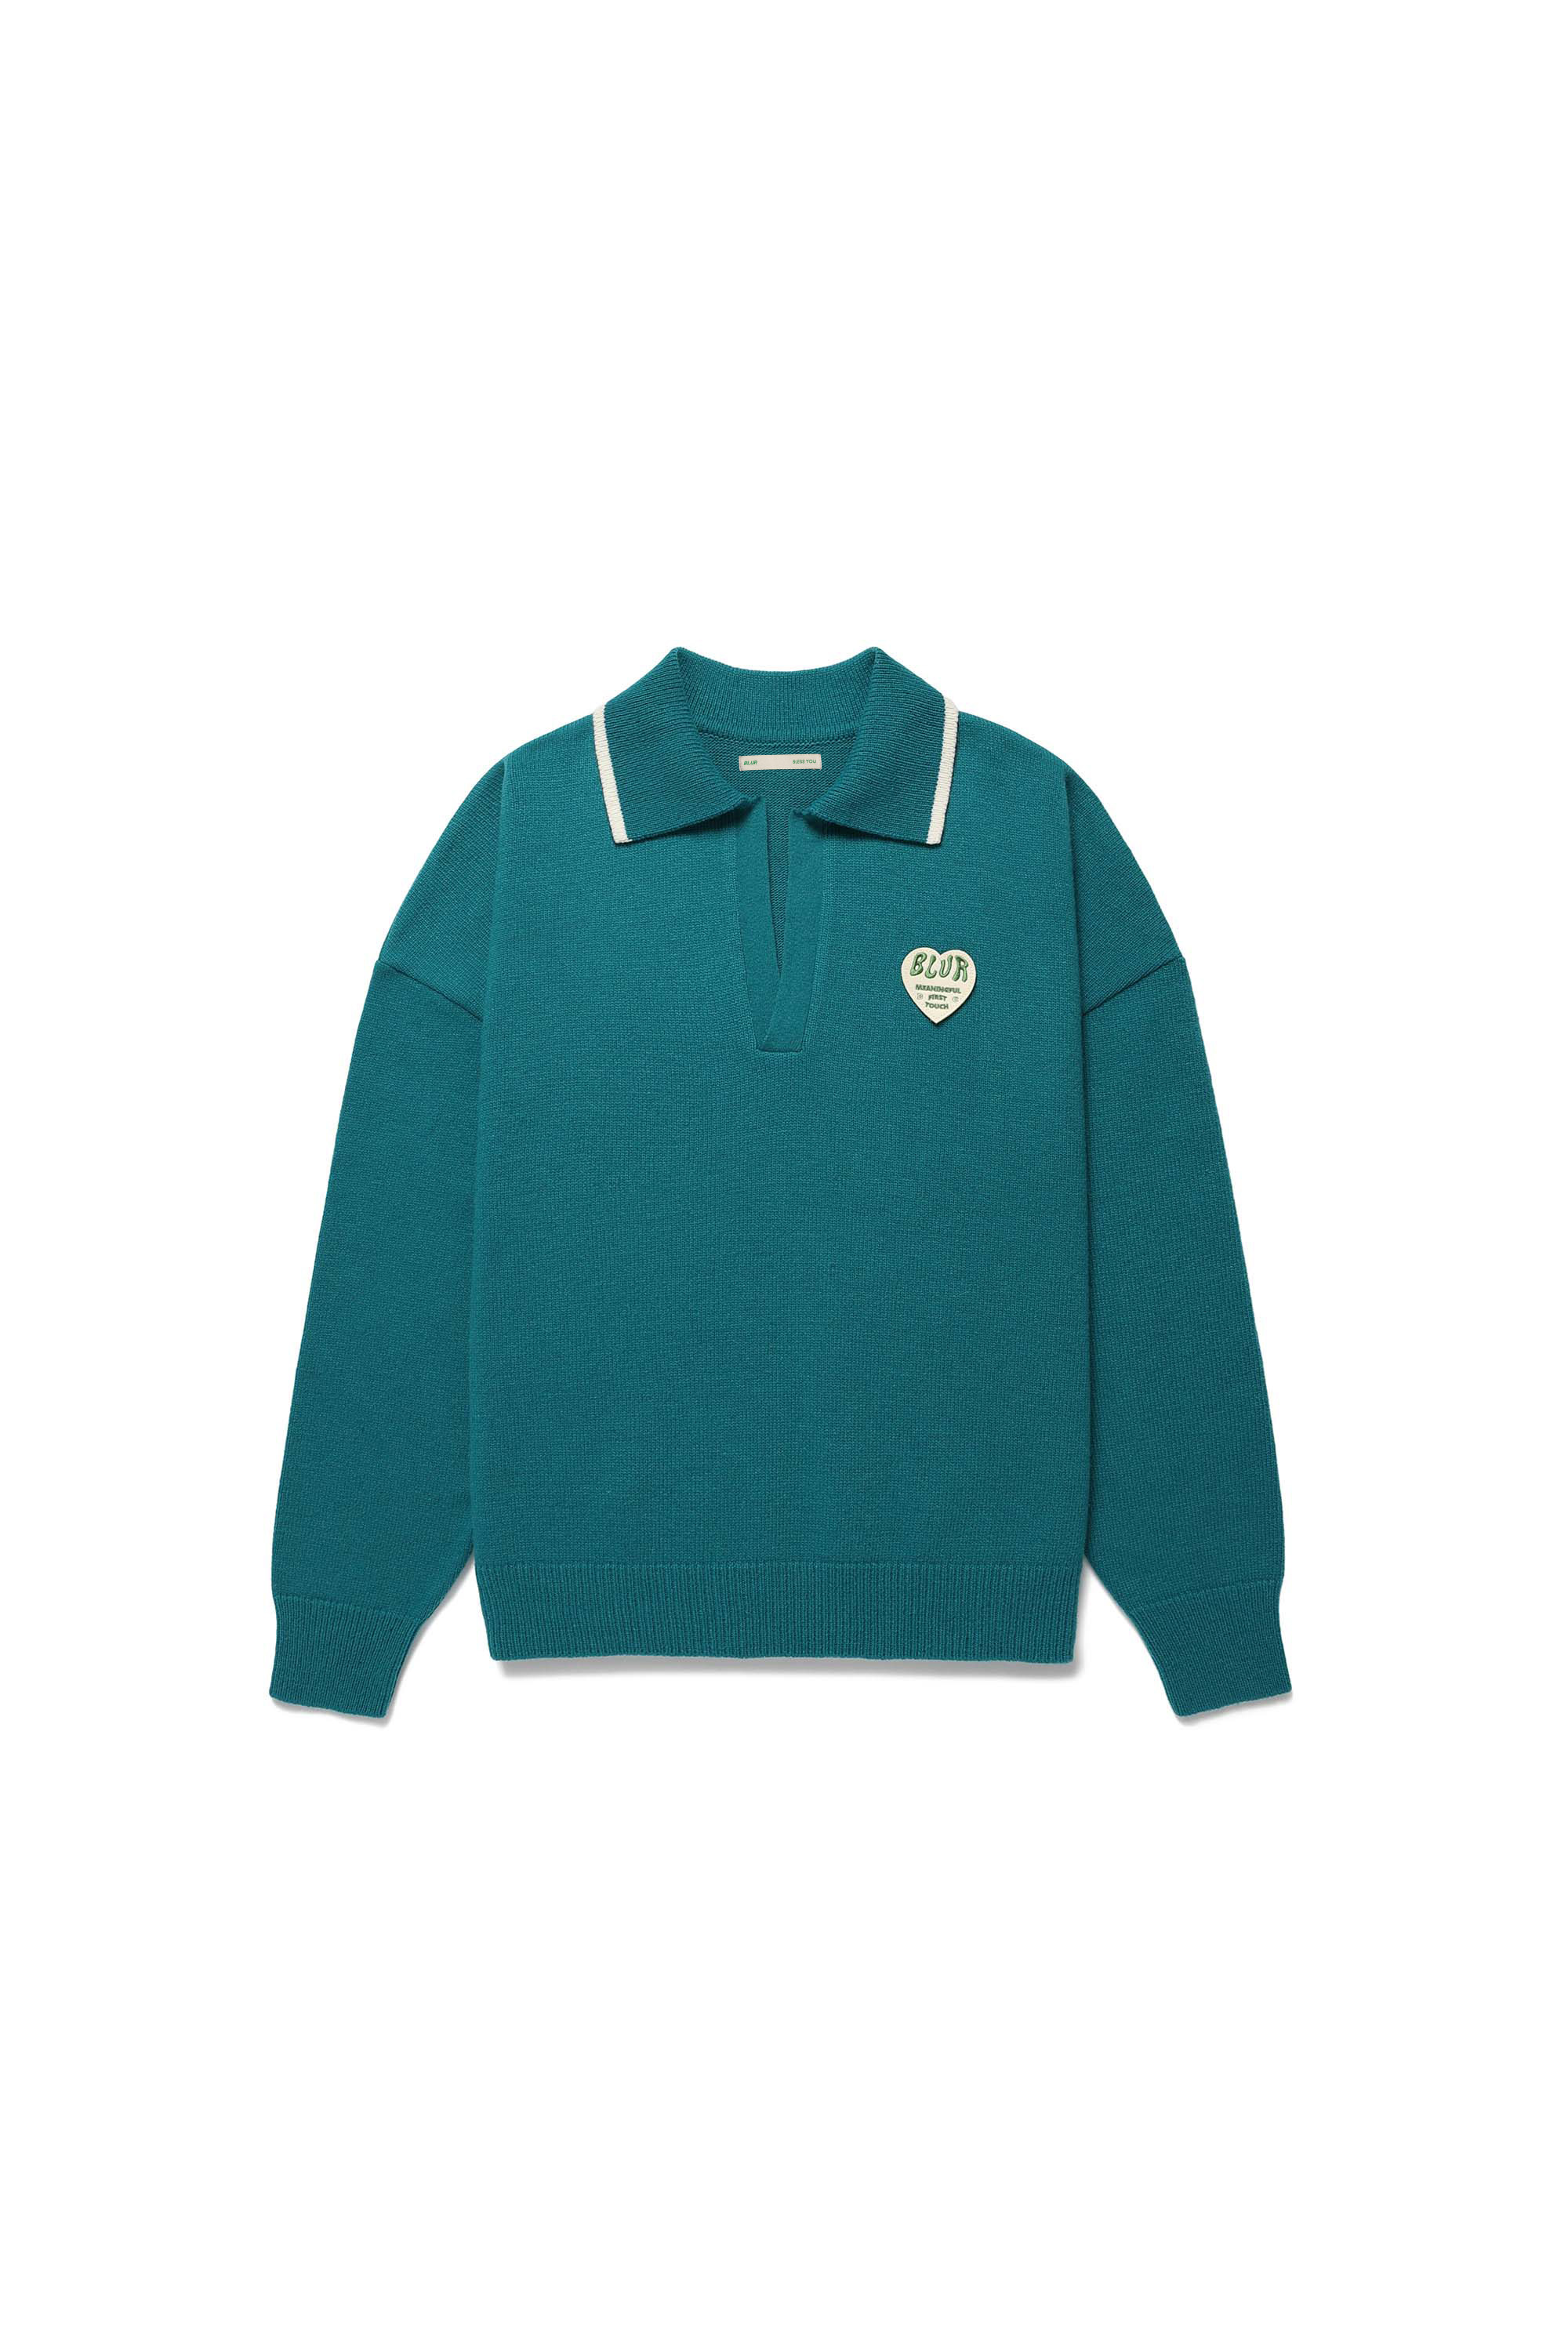 OPEN COLLARED KNIT PULLOVER - BLUE GREEN